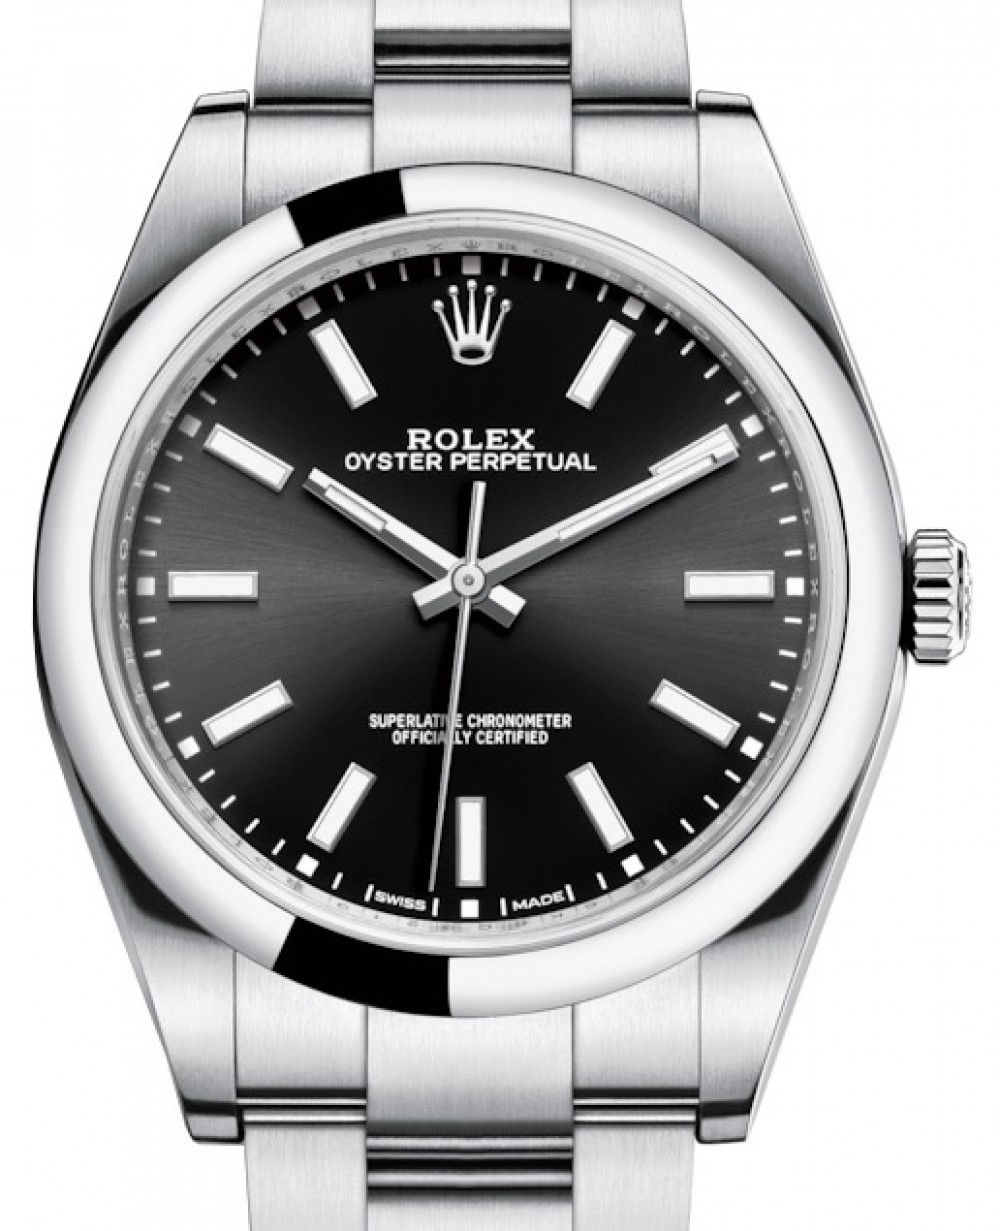 Rolex Oyster Perpetual 39 114300 Black Index Domed Stainless Steel 39mm - BRAND